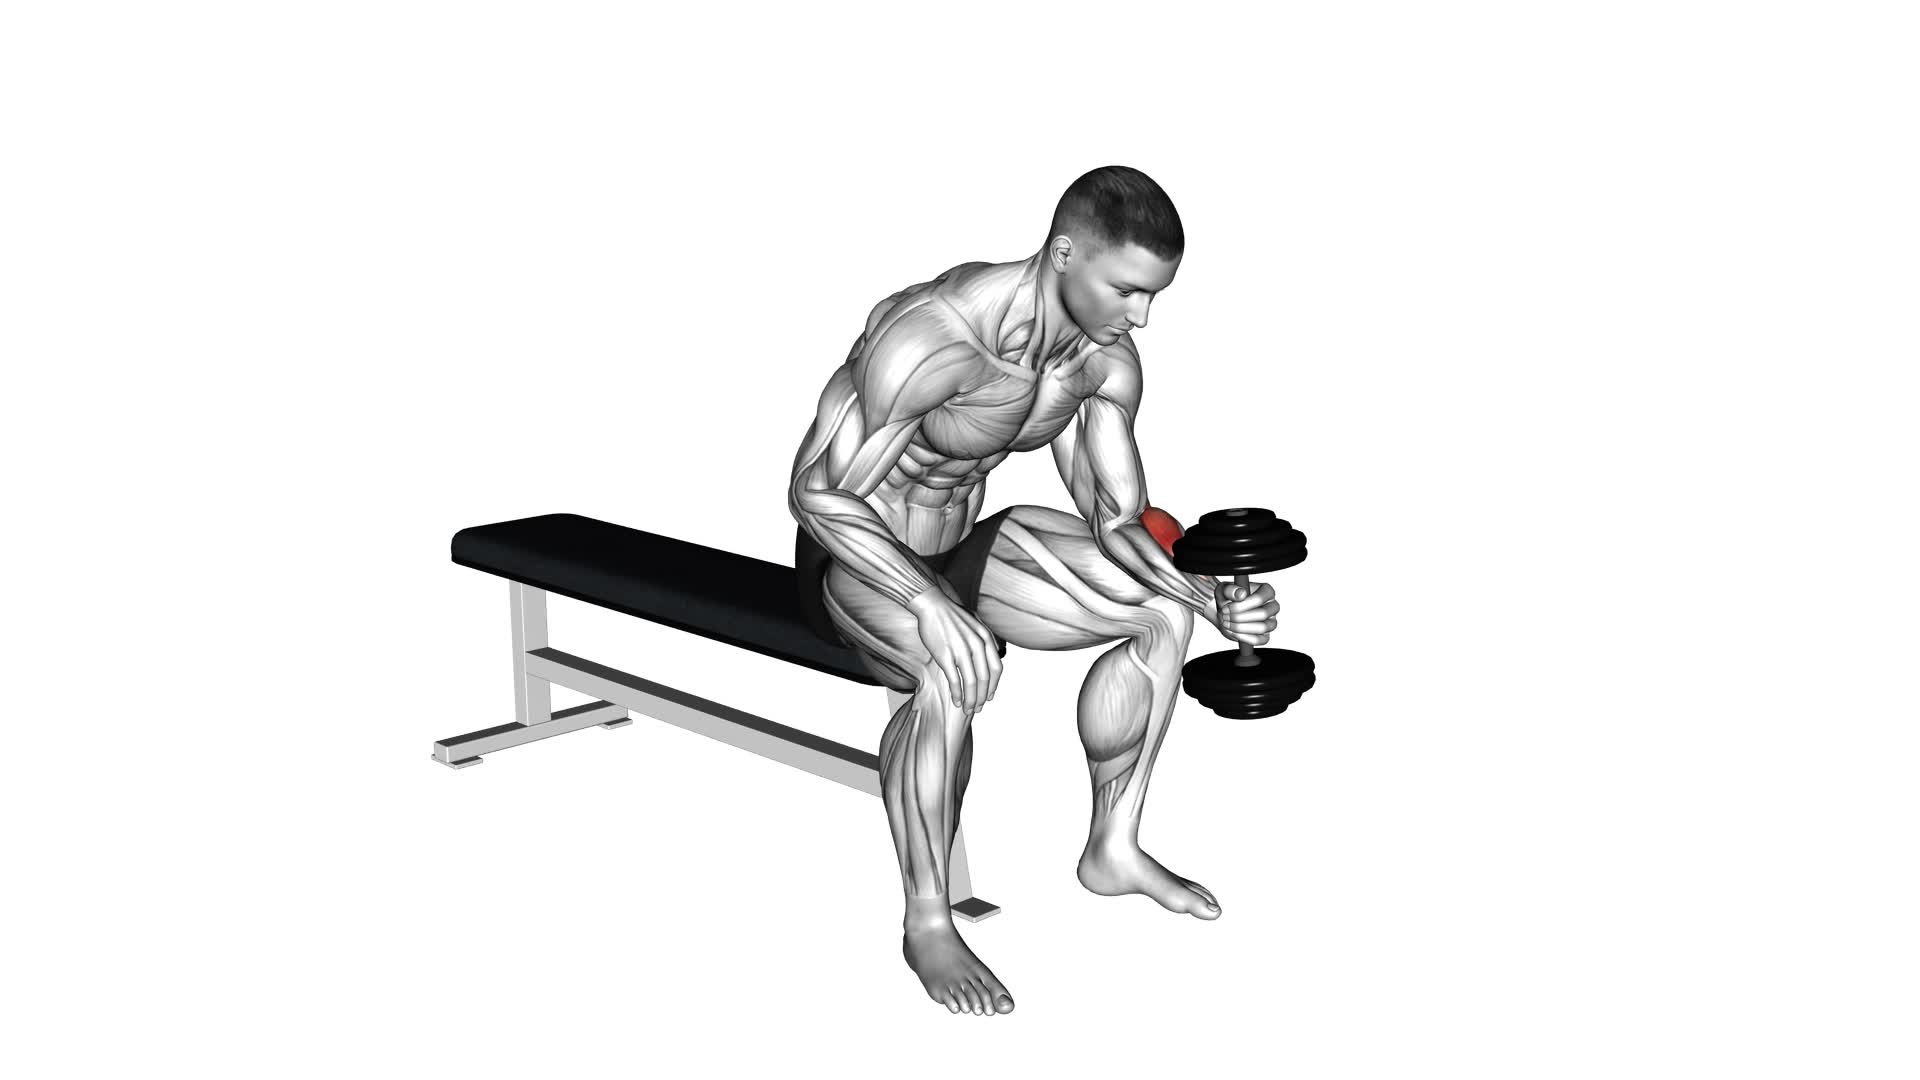 Dumbbell One Arm Seated Neutral Wrist Curl - Video Exercise Guide & Tips